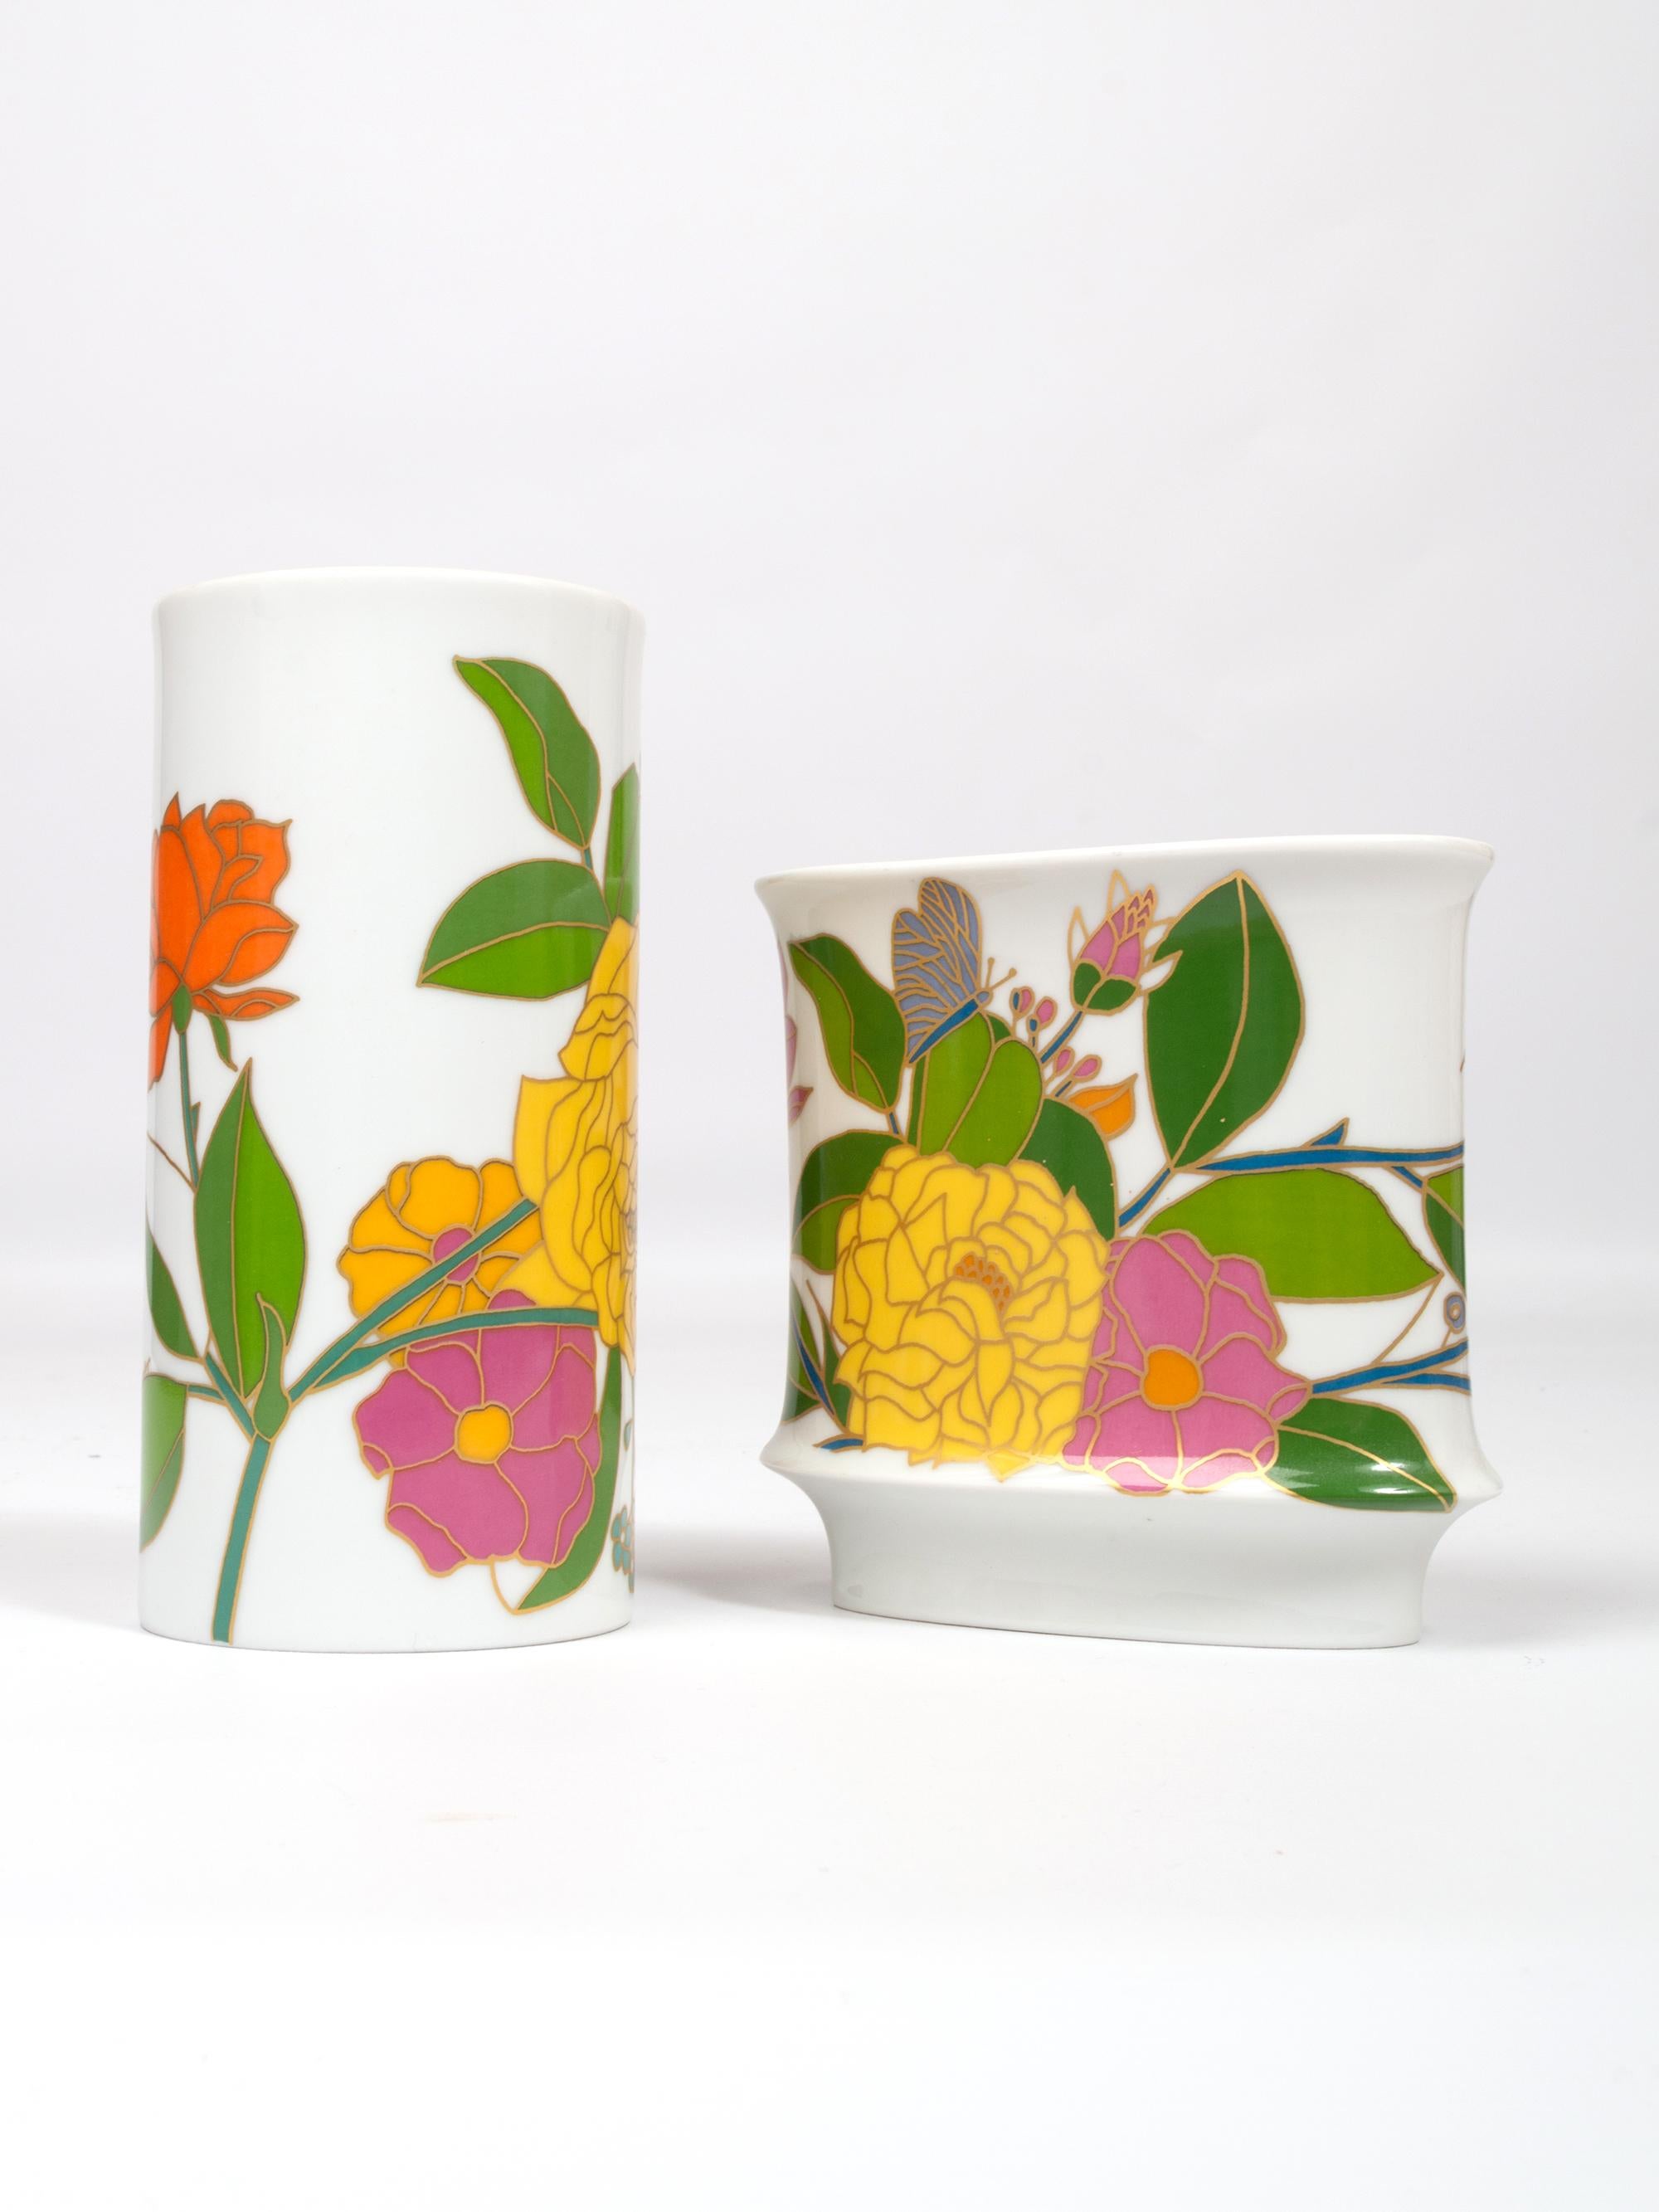 Set of 2 Porcelain Art Vases by W. Bauer for Rosenthal, Germany, circa 1970 For Sale 5